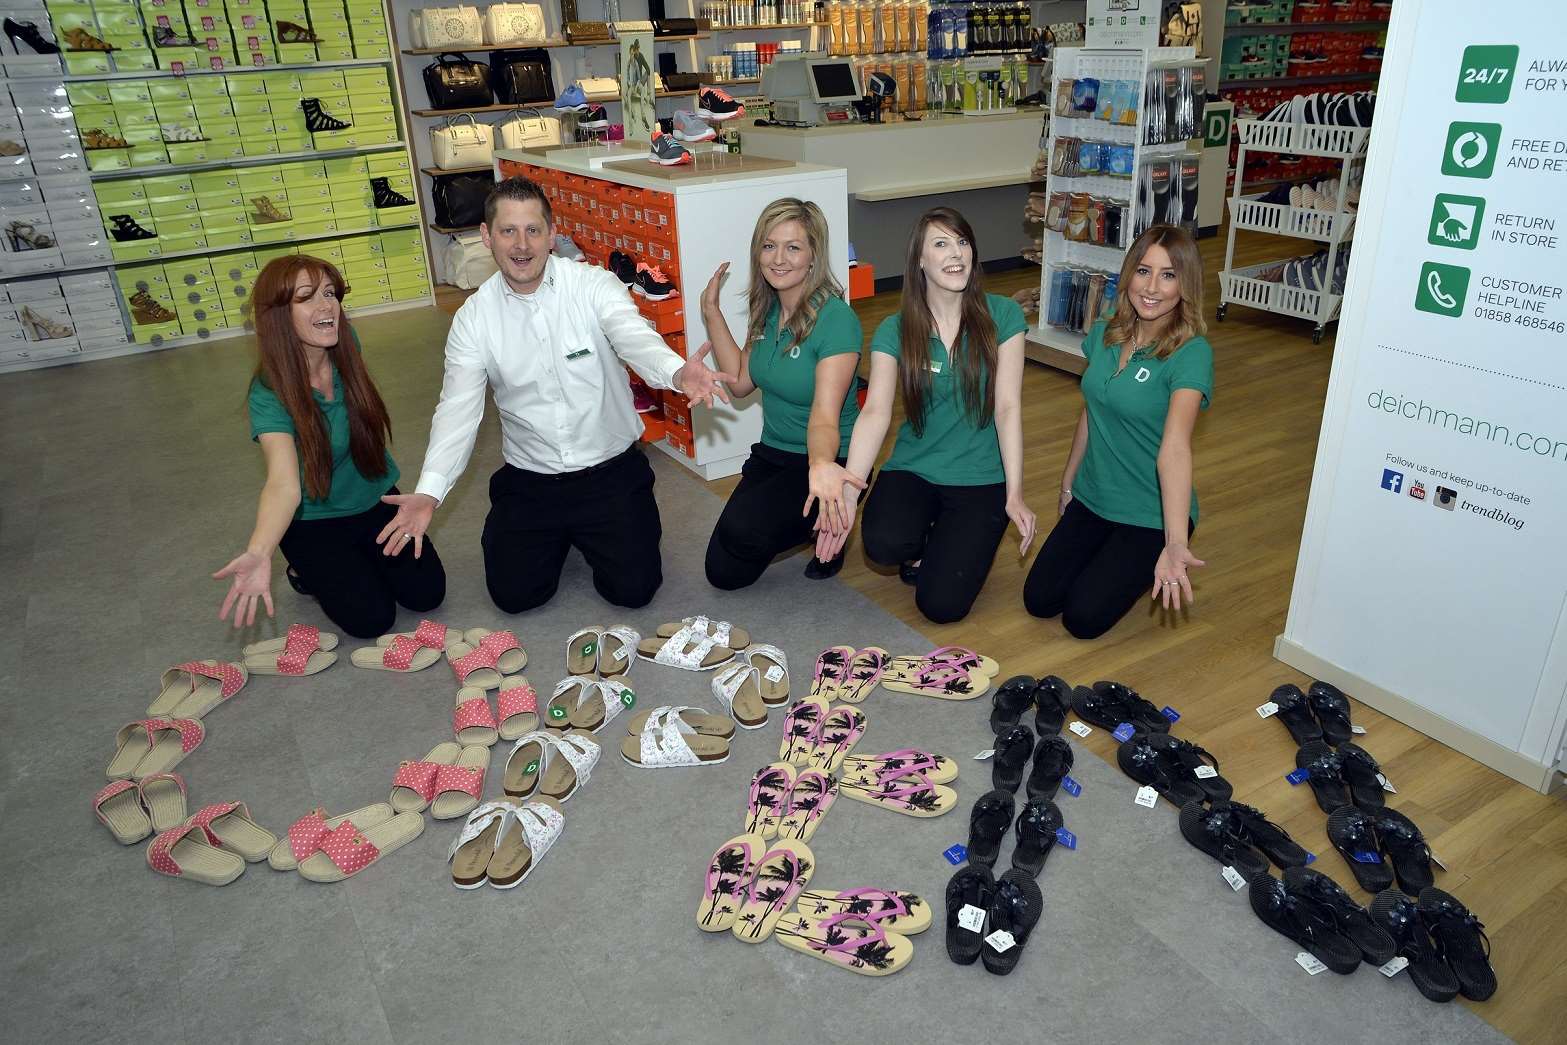 Deichmann has opened in the former WHSmith premises in the Pentagon Centre